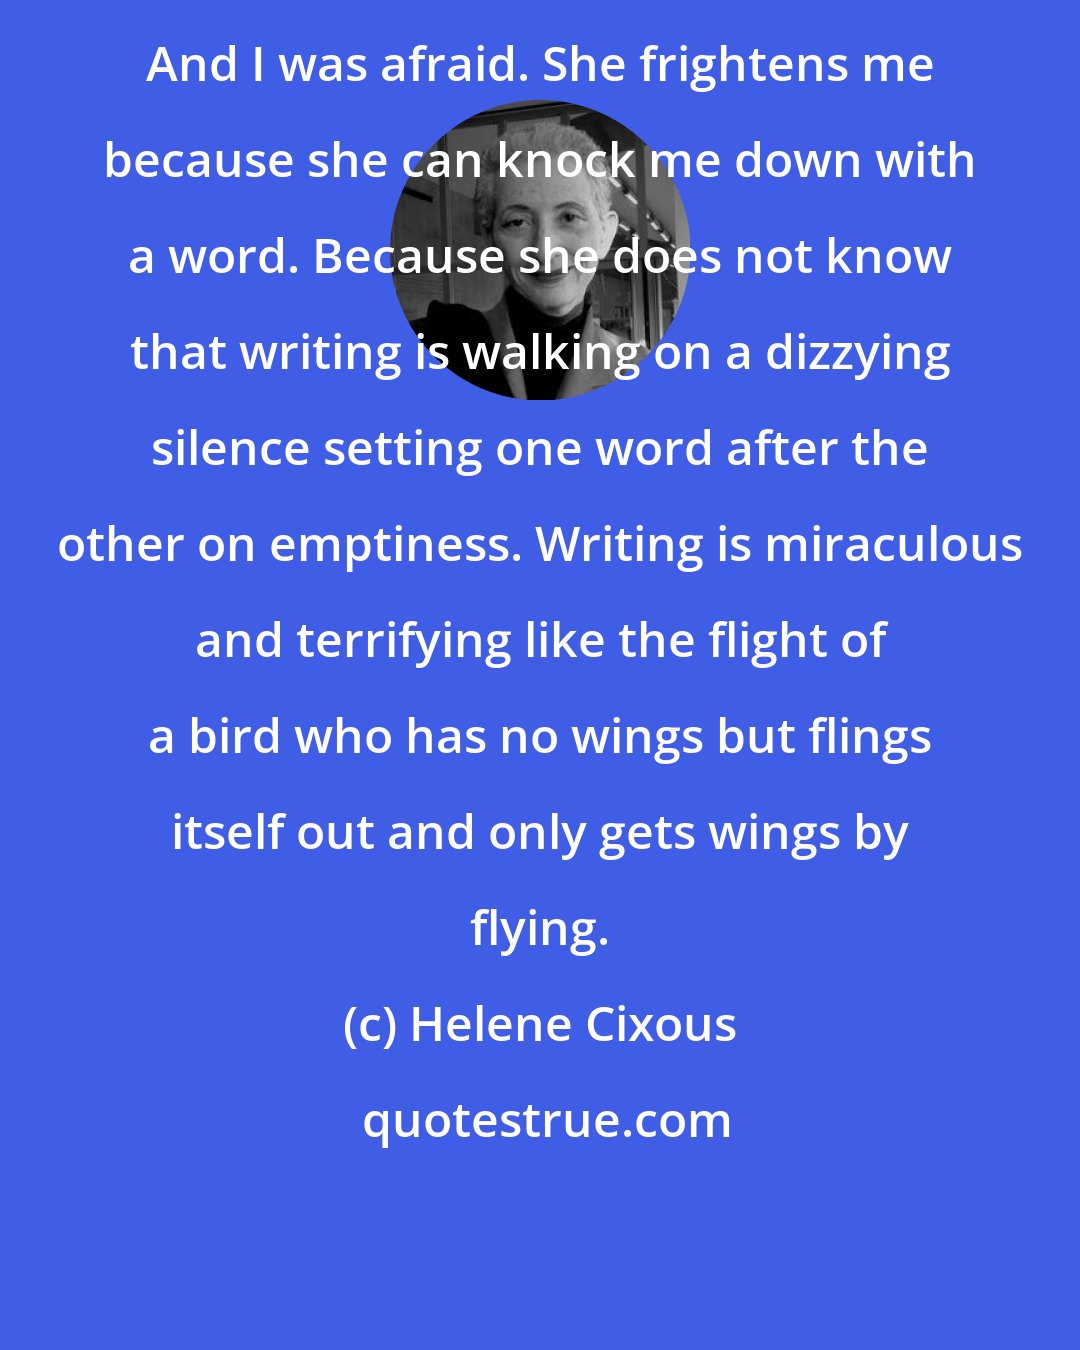 Helene Cixous: And I was afraid. She frightens me because she can knock me down with a word. Because she does not know that writing is walking on a dizzying silence setting one word after the other on emptiness. Writing is miraculous and terrifying like the flight of a bird who has no wings but flings itself out and only gets wings by flying.